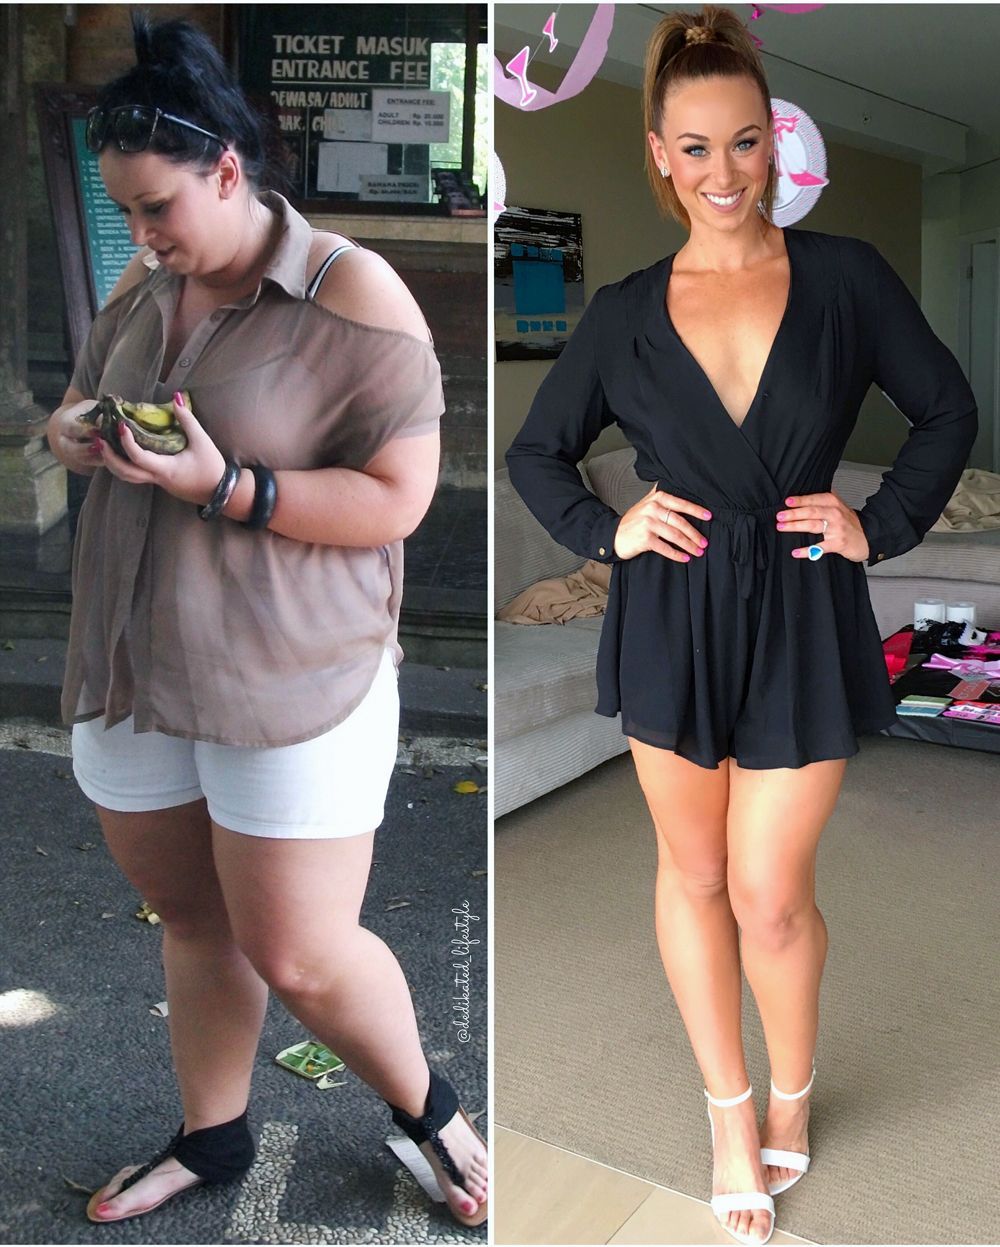 Kate Writer's Full Training & Diet Plan For How She Lost Over 50KGs In 1 Year -   8 1 year fitness Transformation
 ideas